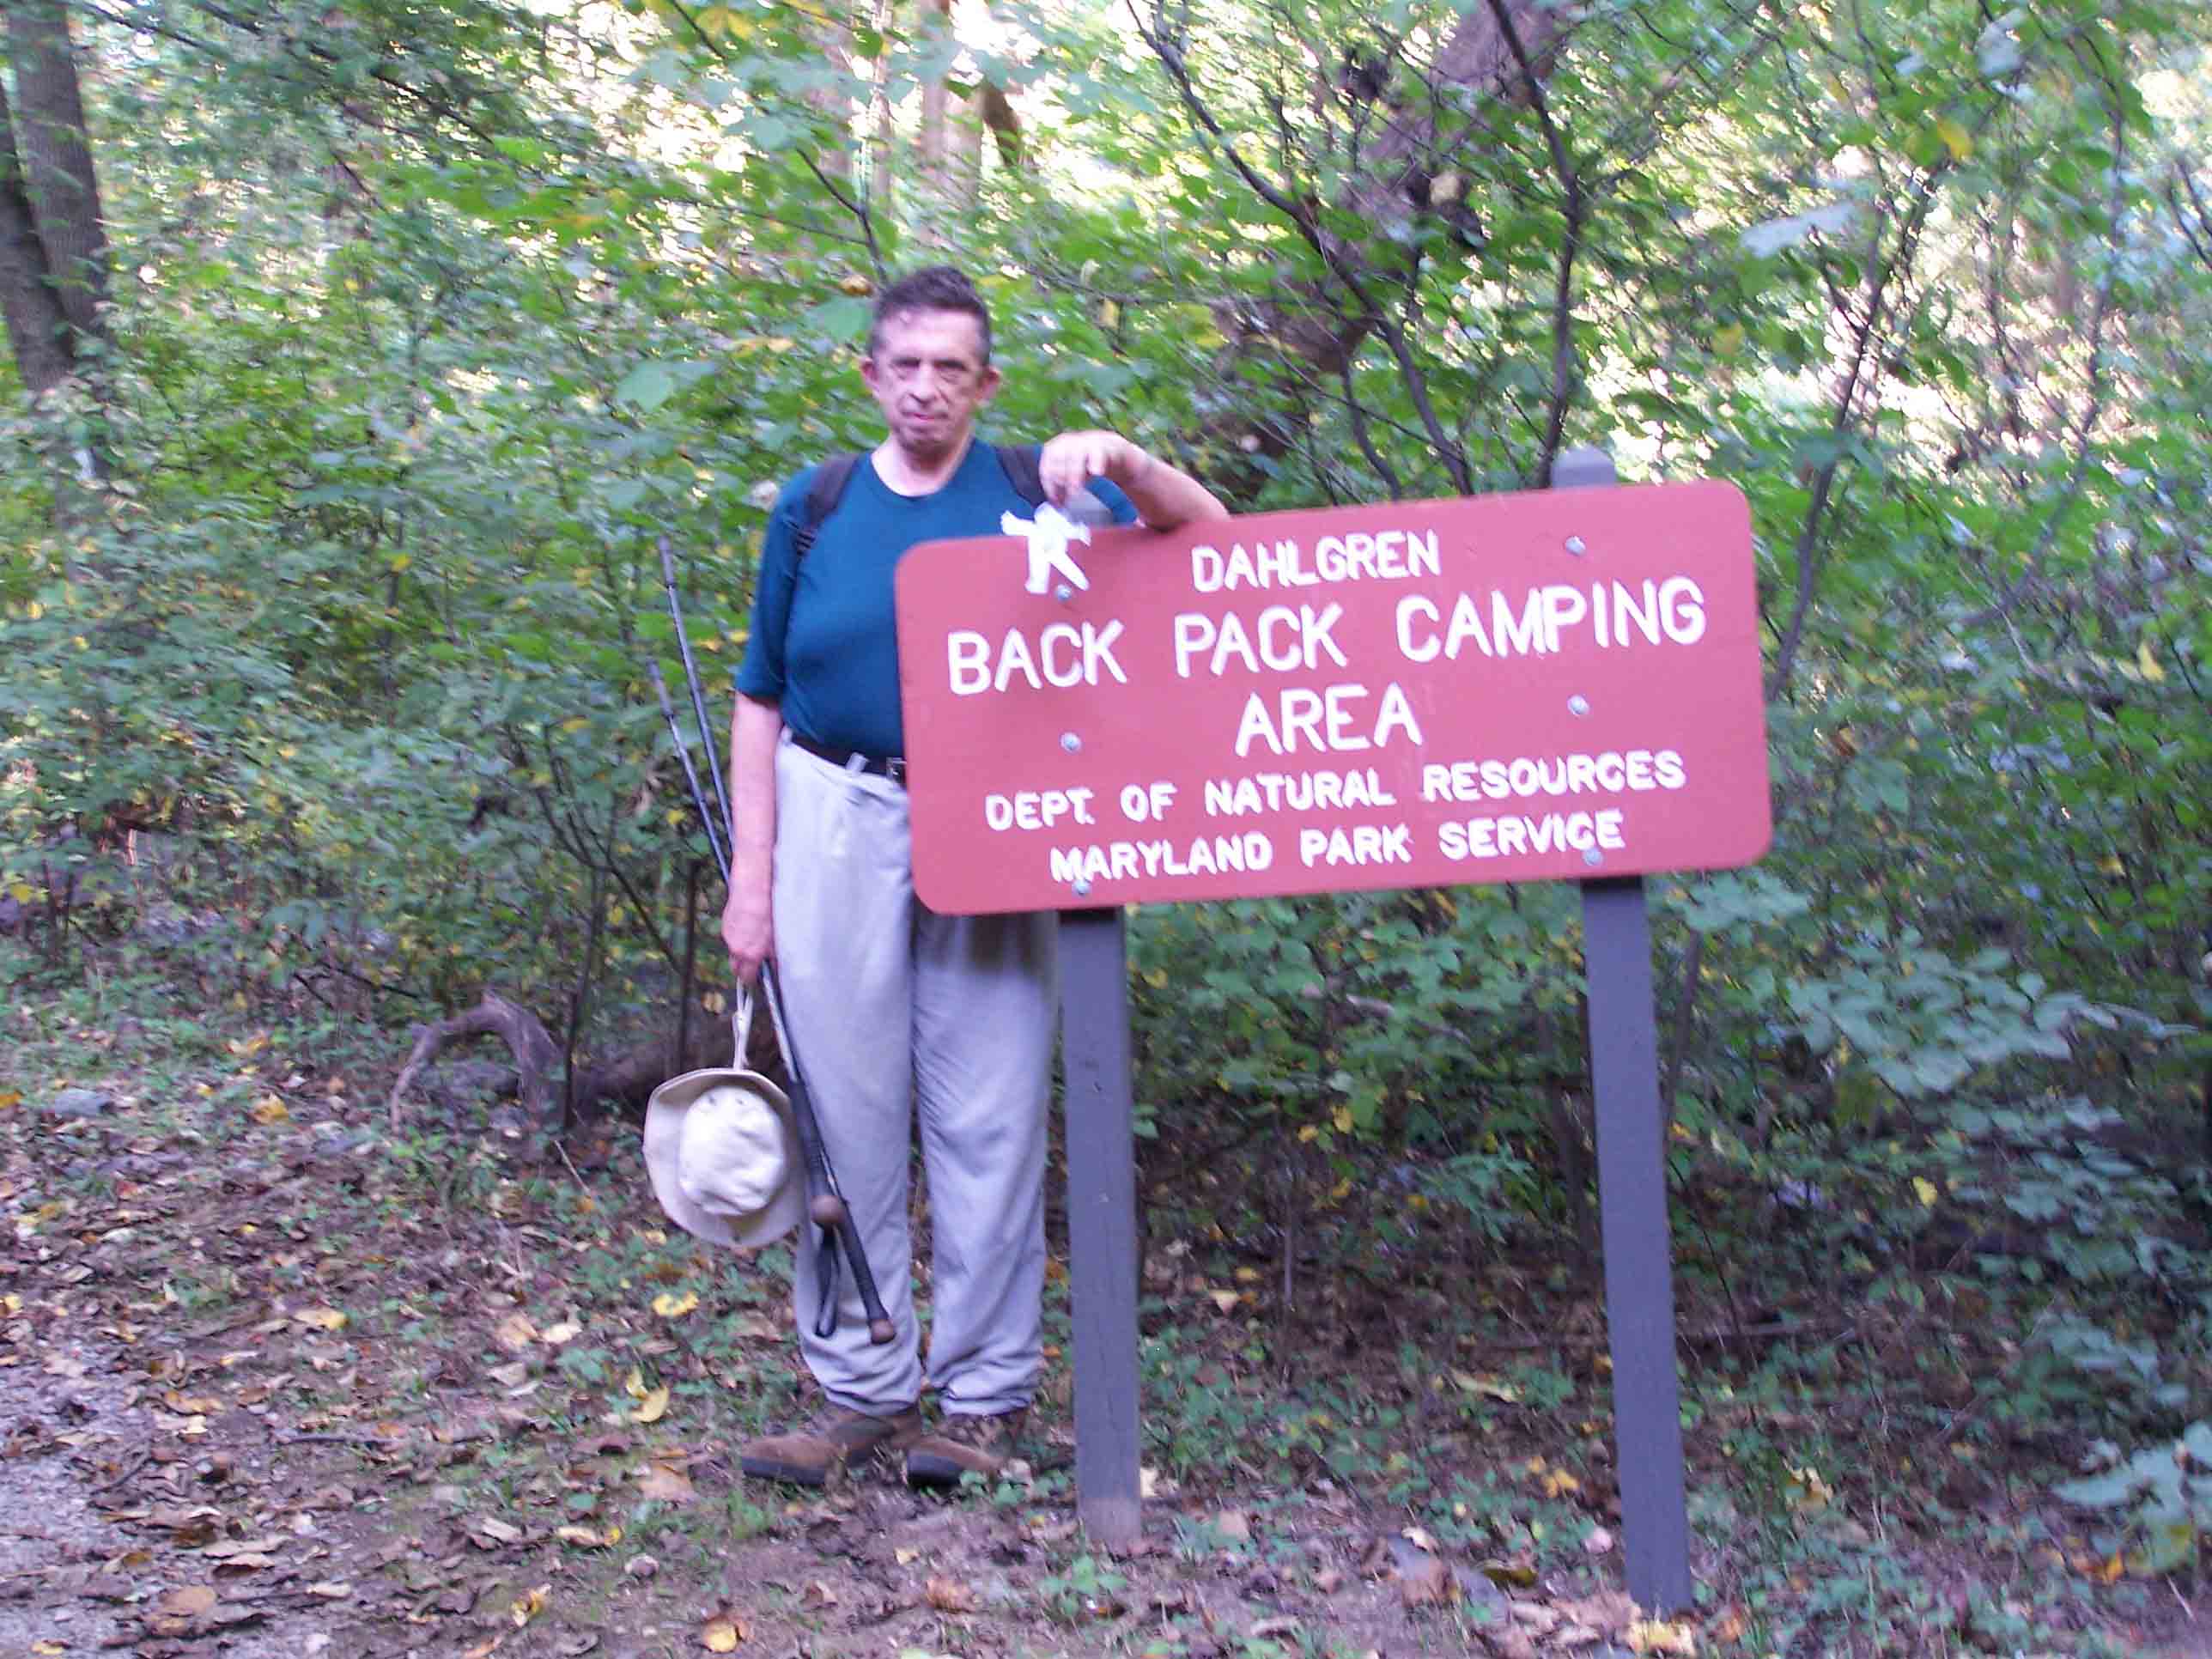 Uncle Dave went over the 1000 miles total of trail that he has hiked.